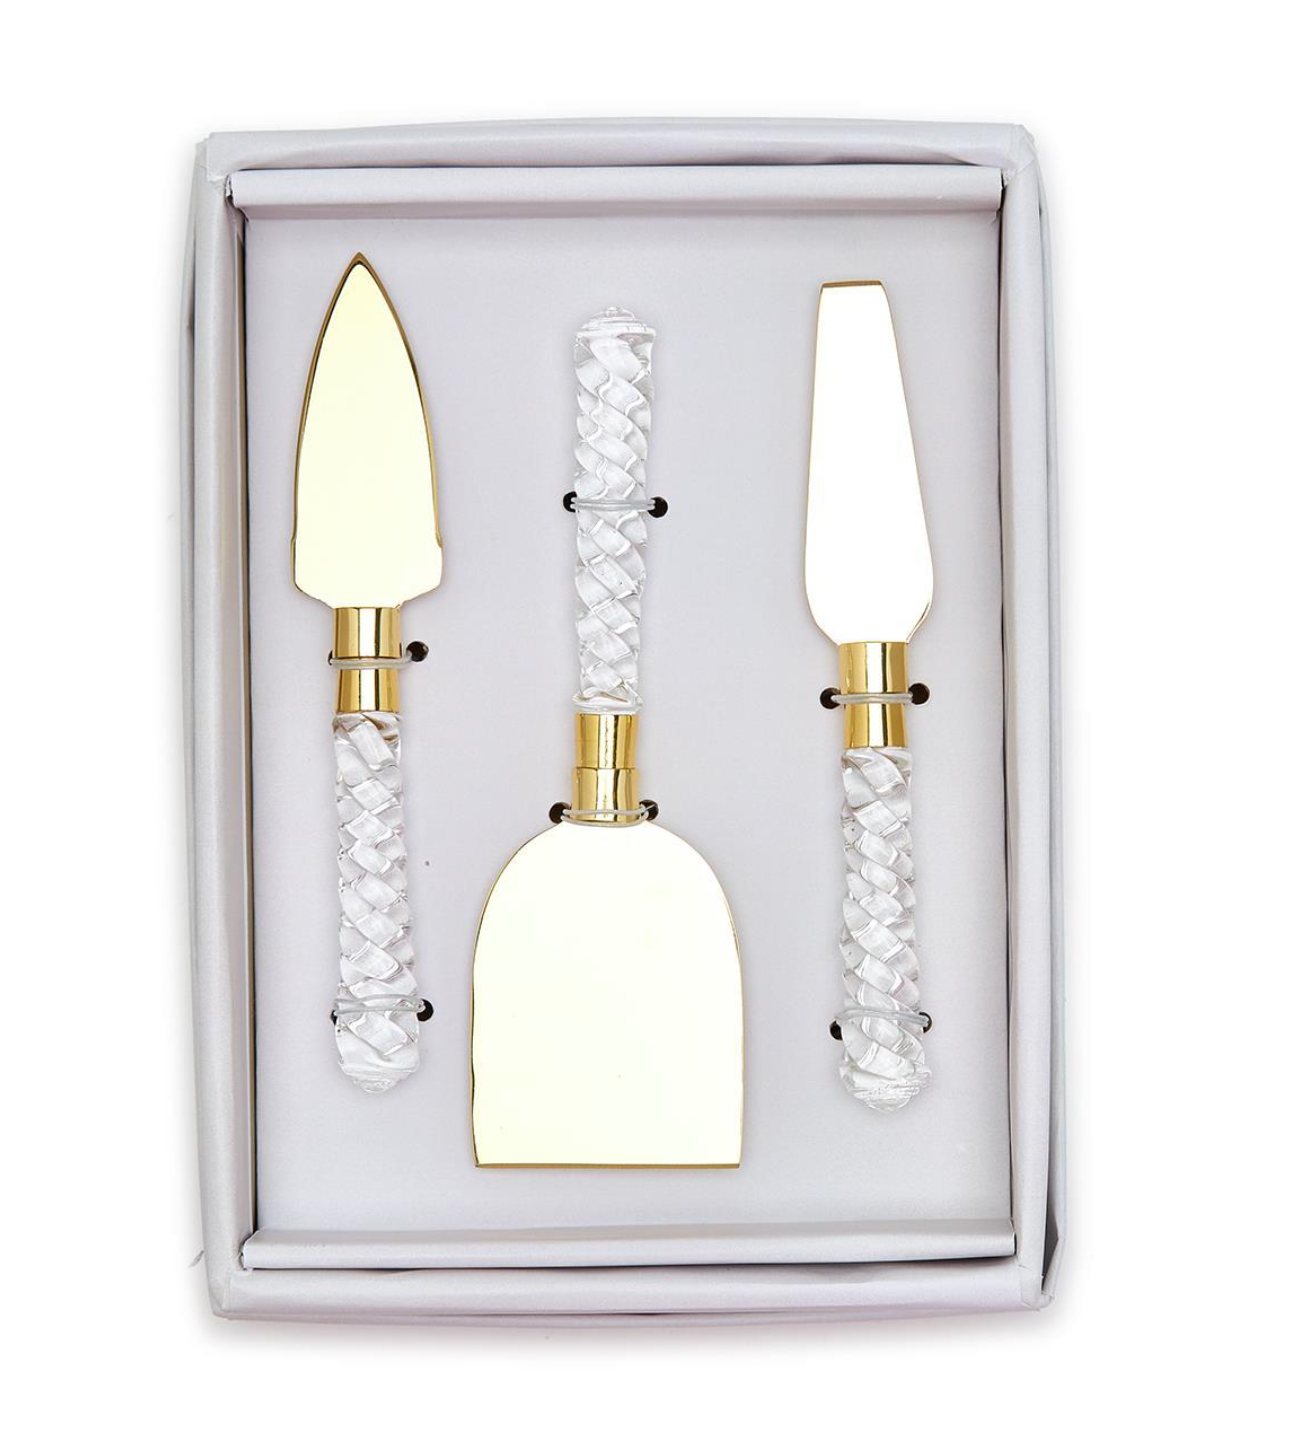 Crystal Clear Cheese Knives